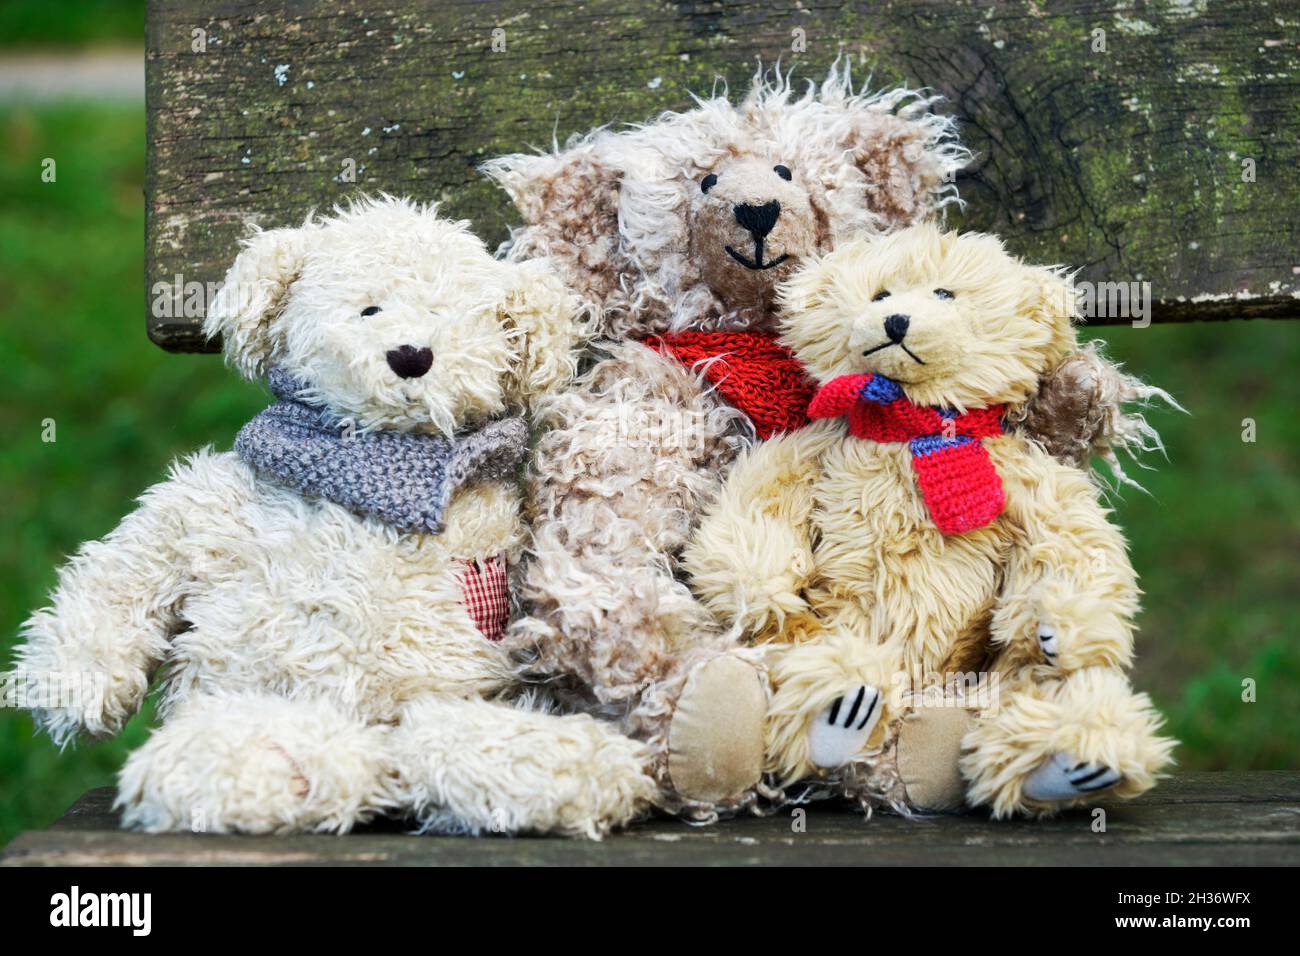 Teddy bears cuddly friends brought to life Stock Photo